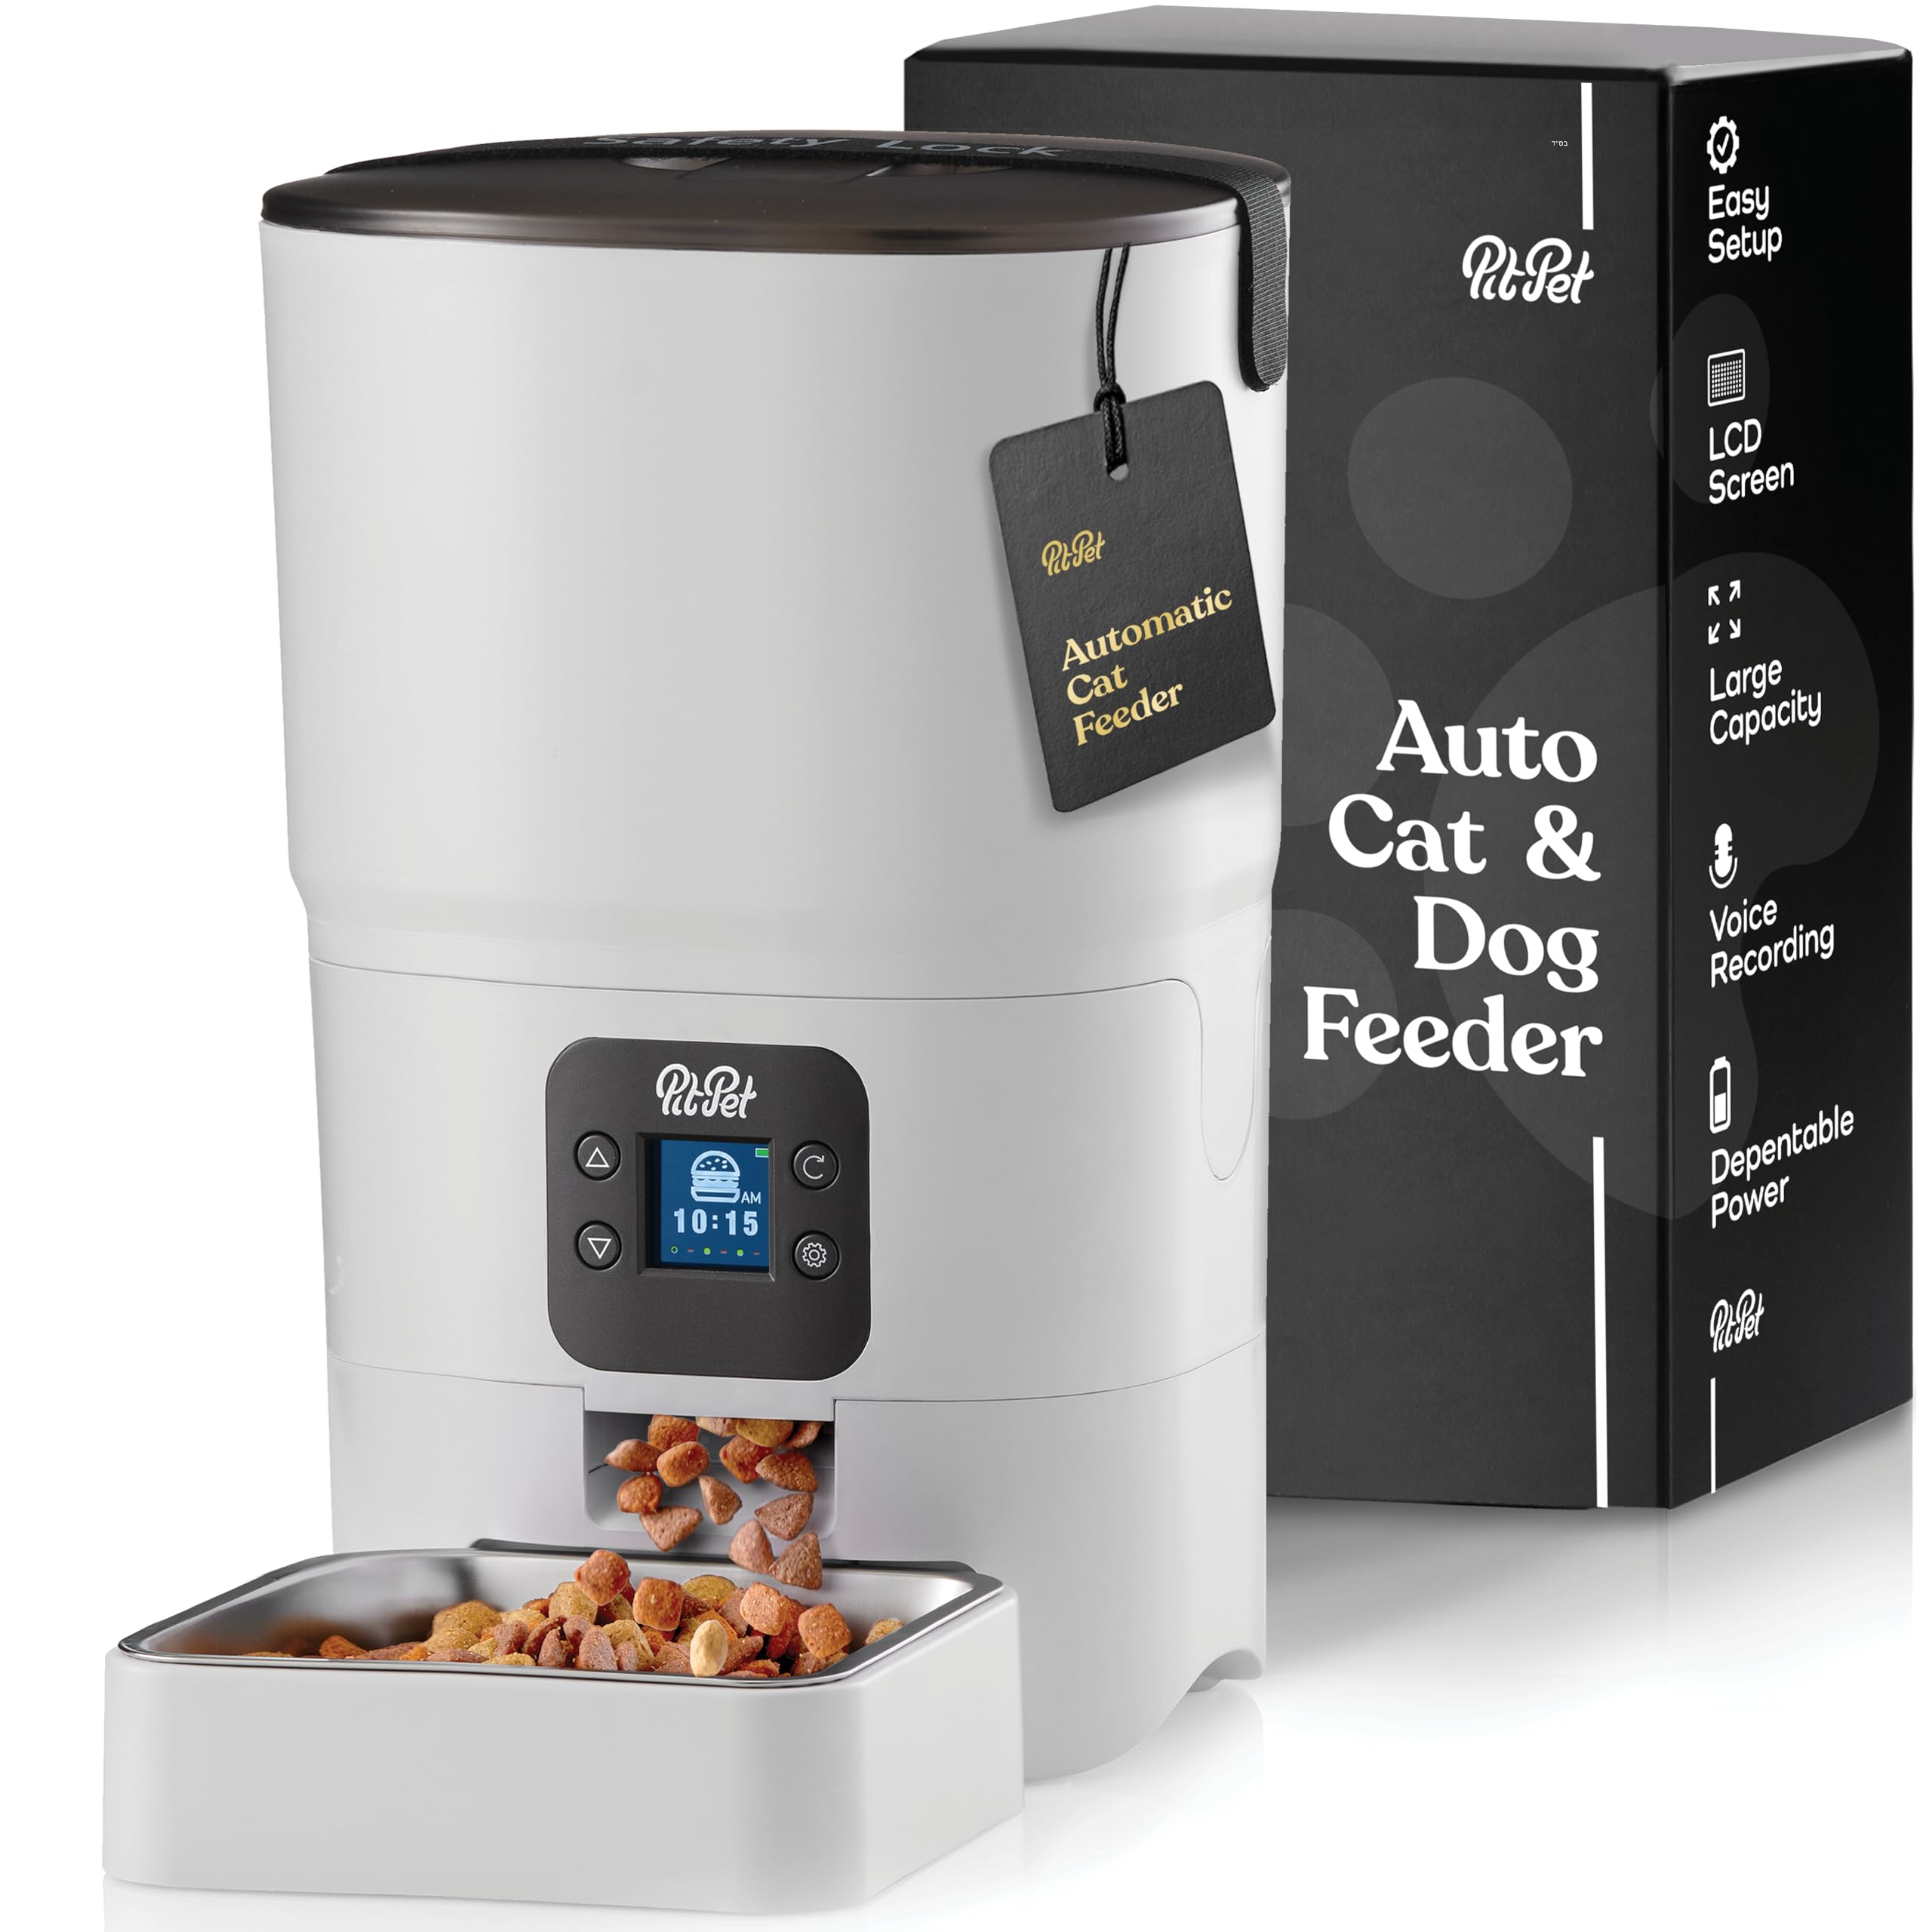 Smart Automatic Cat Feeder - 6-L Reliable Automatic Cat Food Dispenser with Display LCD Screen for Easy Set Up -Portion Control Automatic Dog Feeder - Desiccant Bag Keeps Dry Food Fresh-Voice Recorder  - Very Good